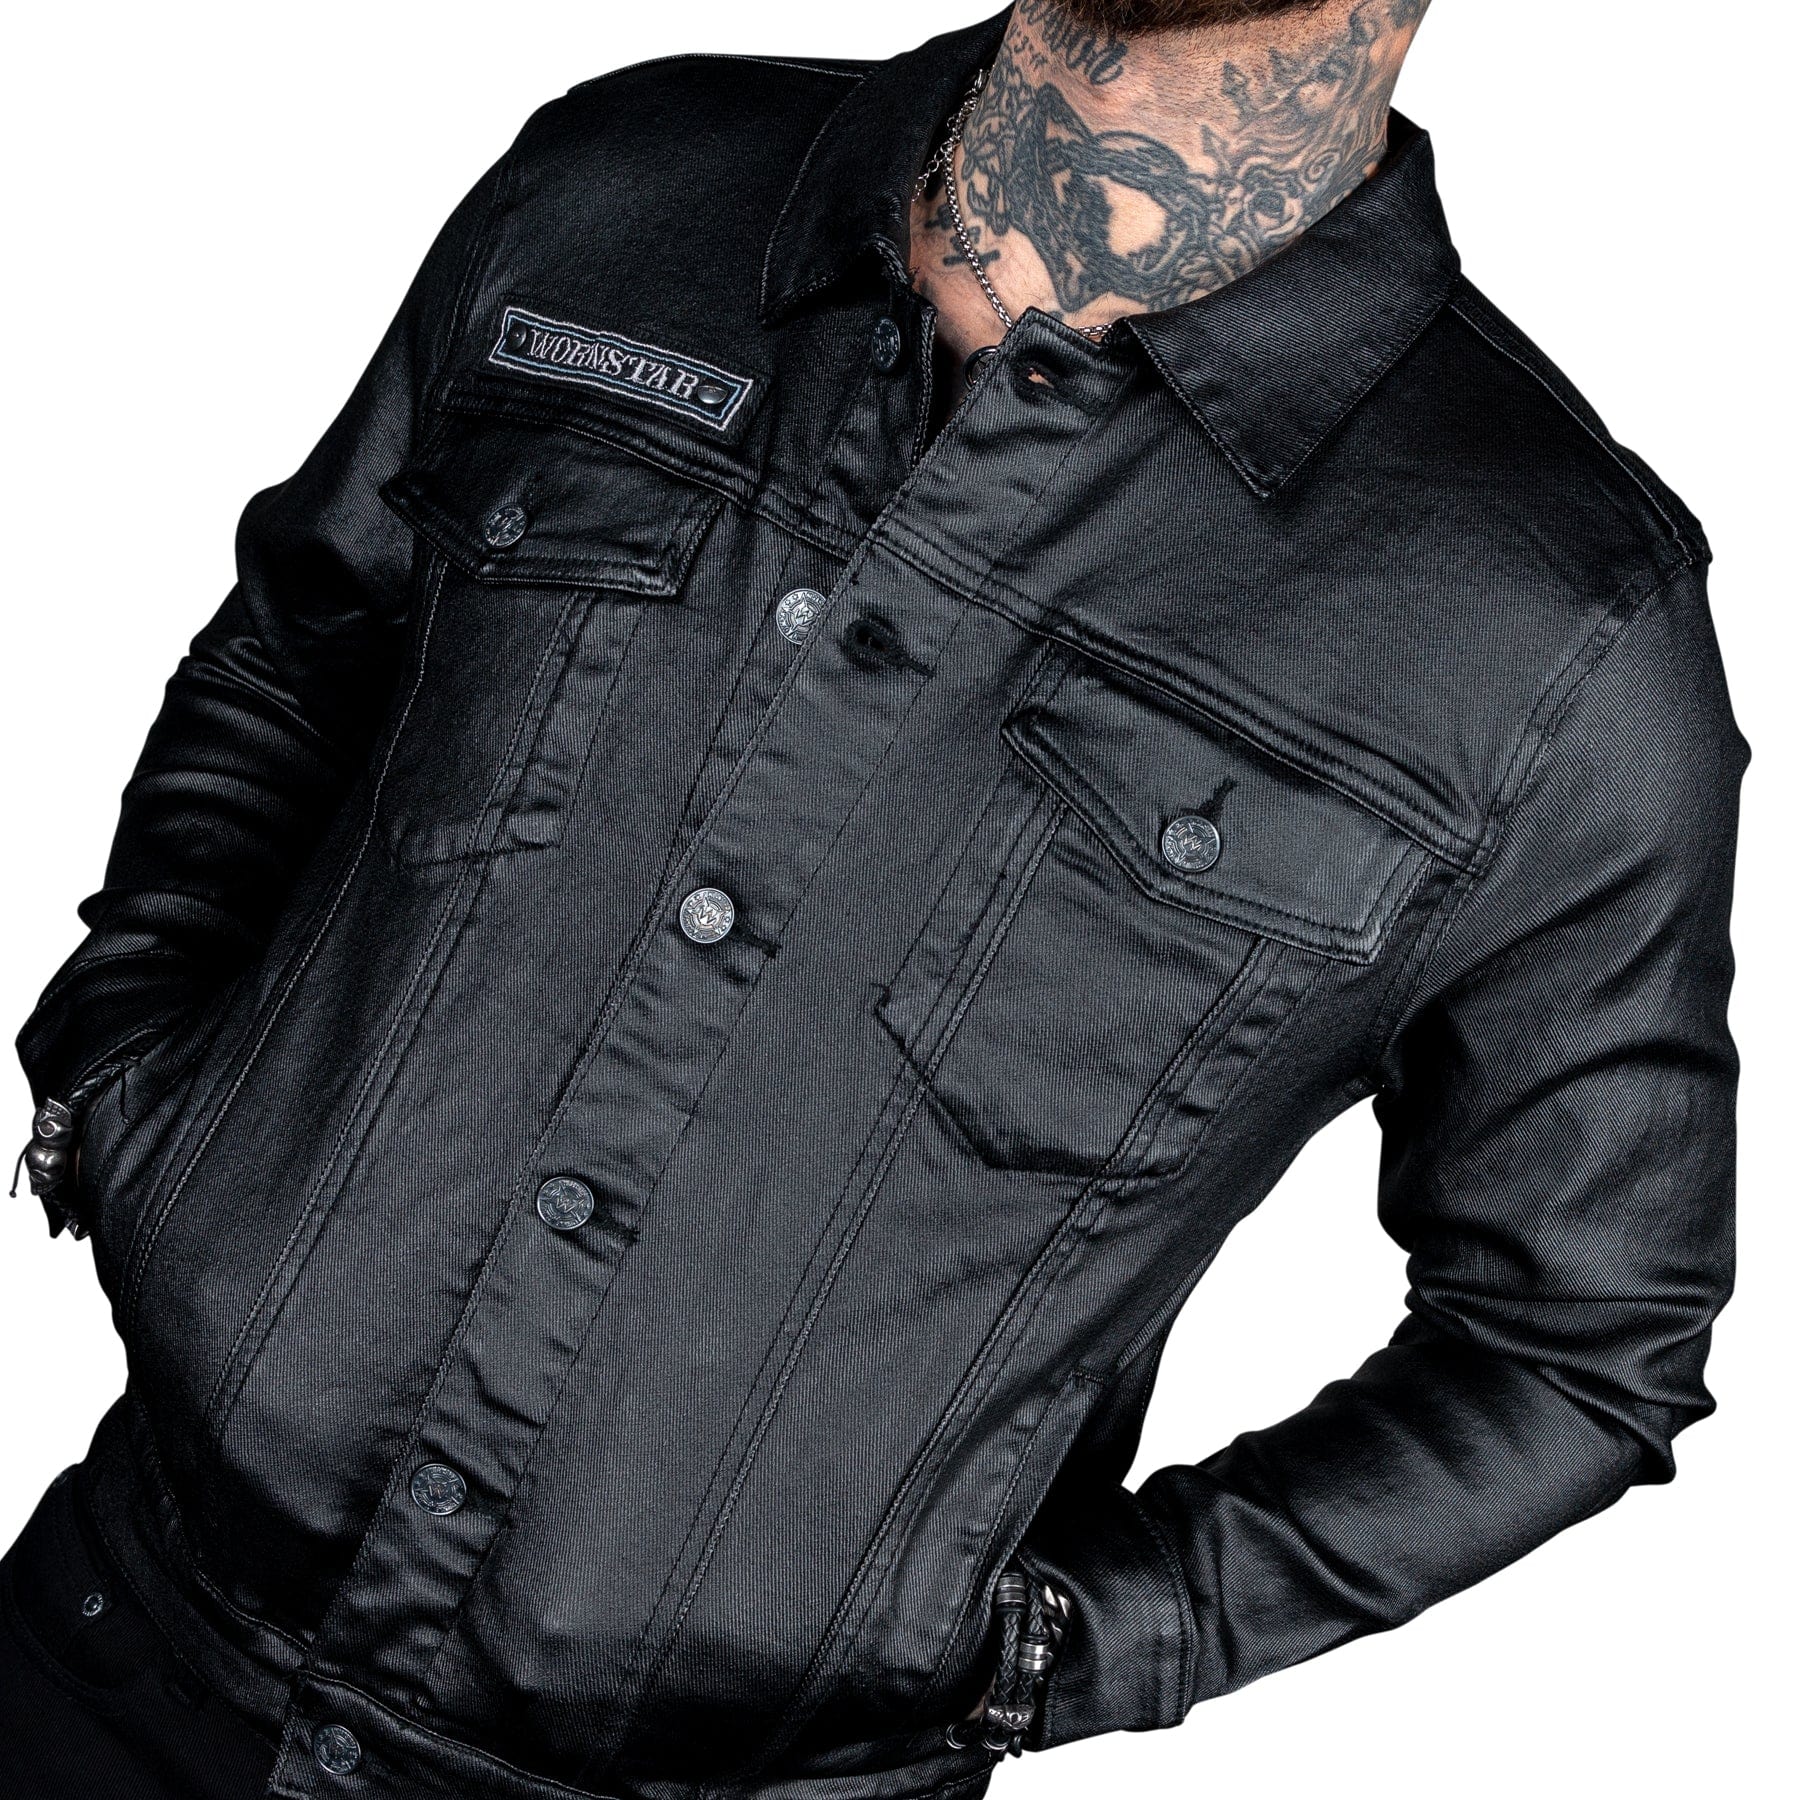 all access collection idolmaker waxed denim jacket